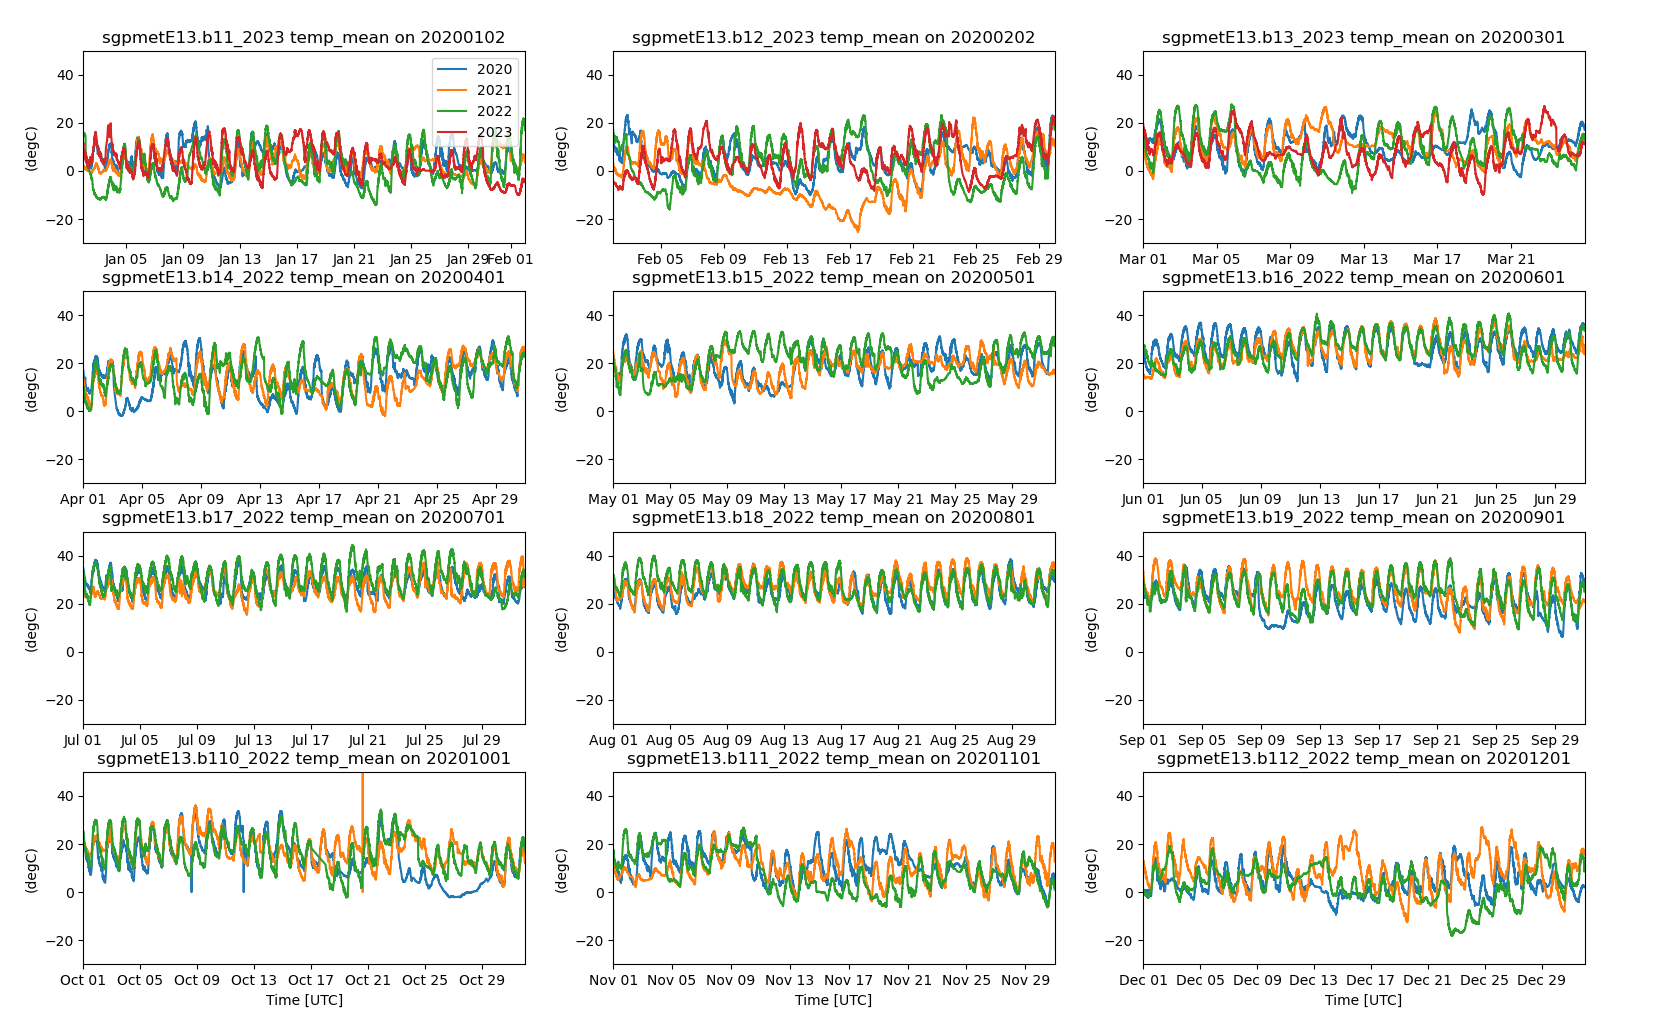 A series of 12 plots--three per horizontal row and four per vertical row--shows the mean temperatures for each month of the year. The January, February, and March plots each contain four lines representing the years 2020, 2021, 2022, and 2023. The other eight plots contain three lines apiece to represent 2020, 2021, and 2022.